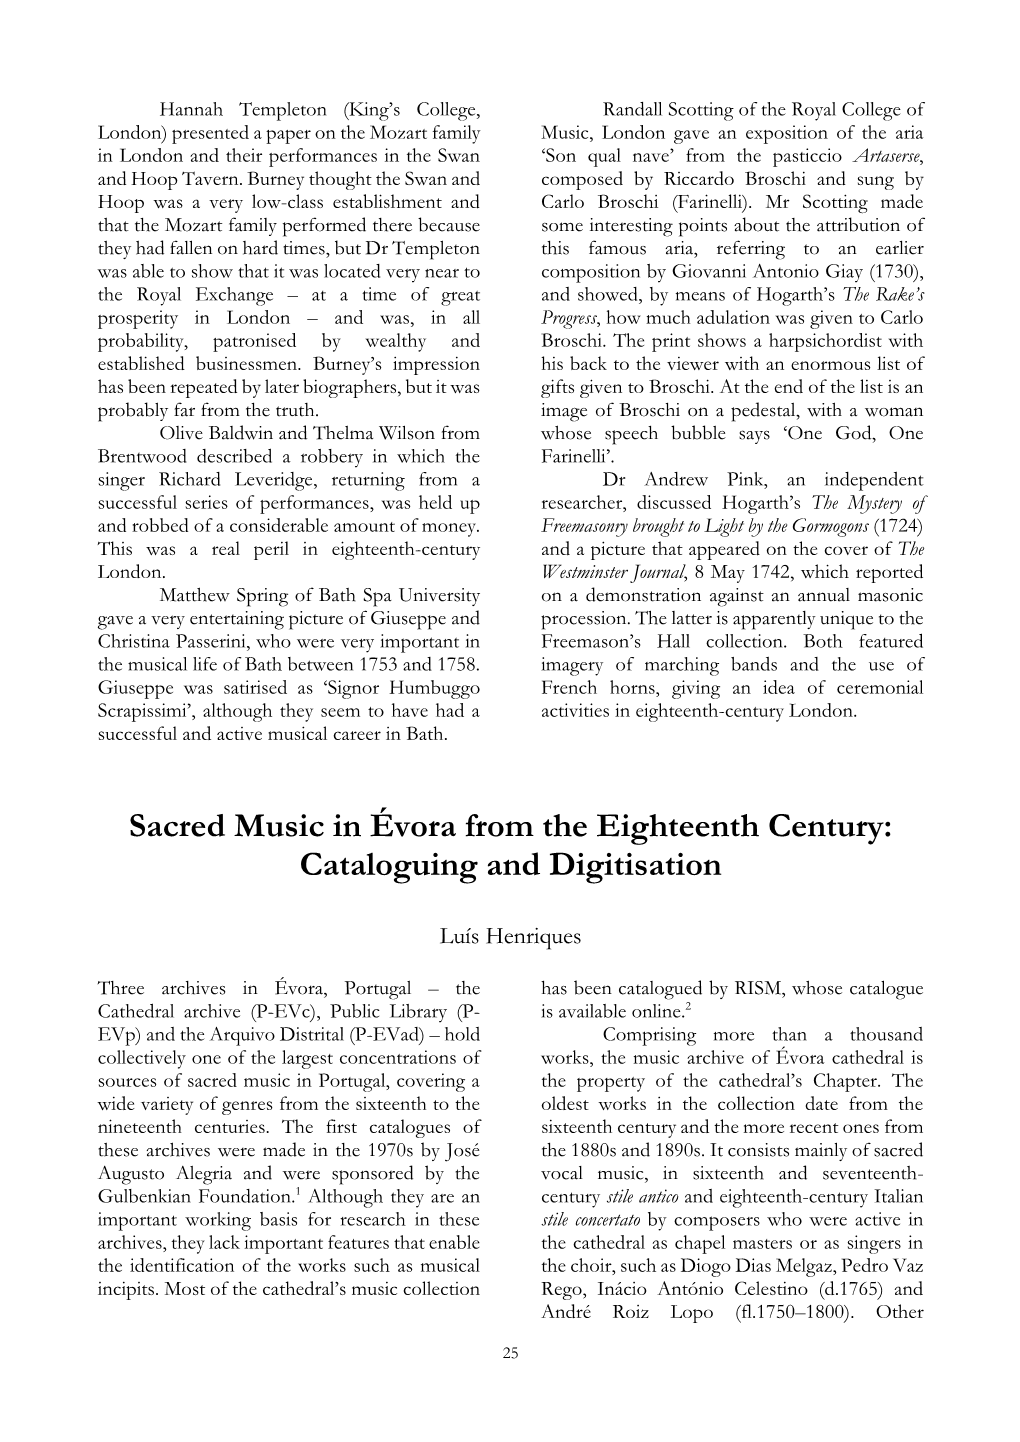 Sacred Music in Évora from the Eighteenth Century: Cataloguing and Digitisation